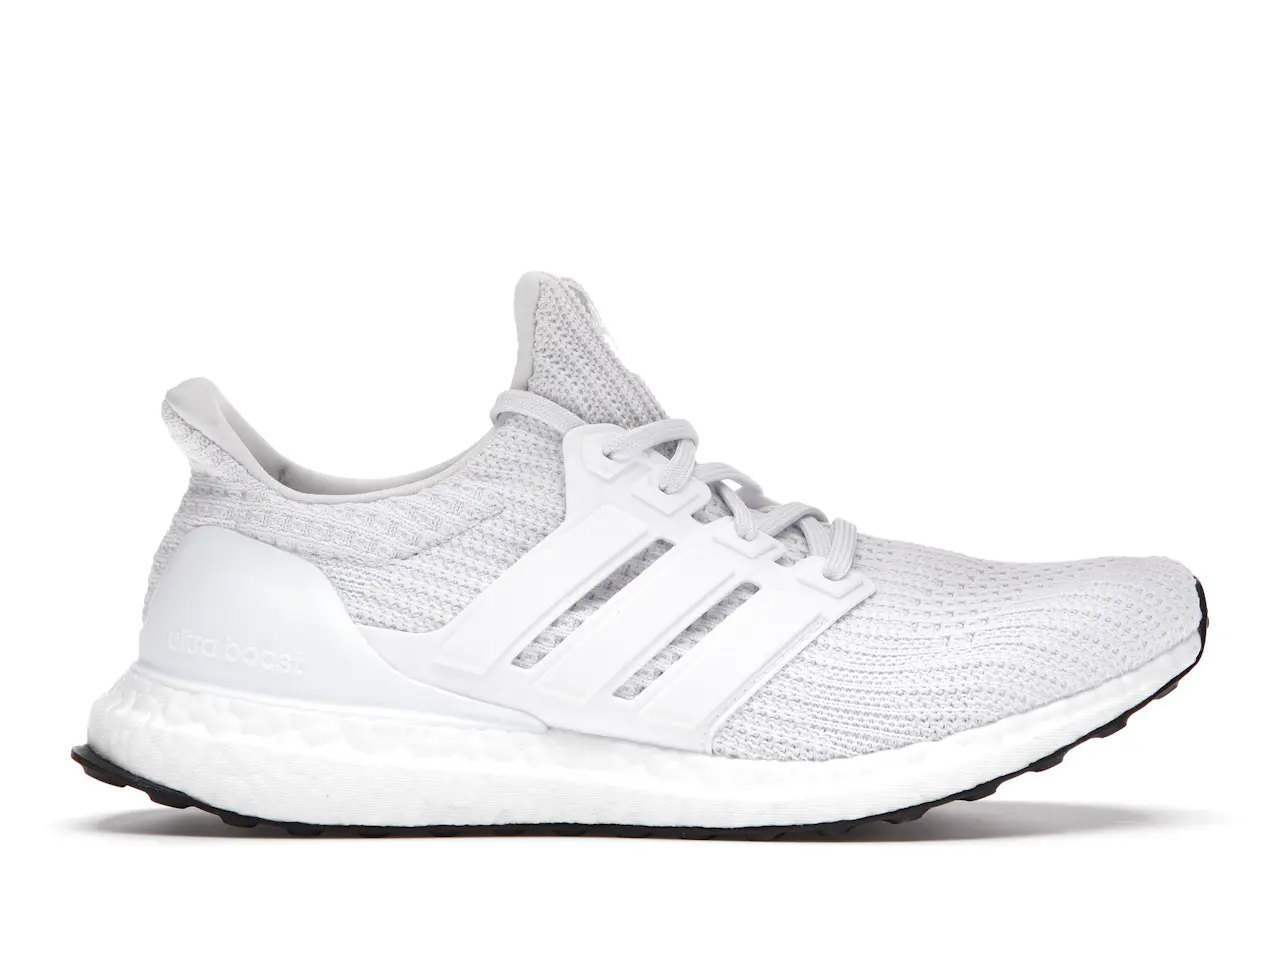 adidas Ultra Boost 4.0 DNA White Men's - FY9120 - US